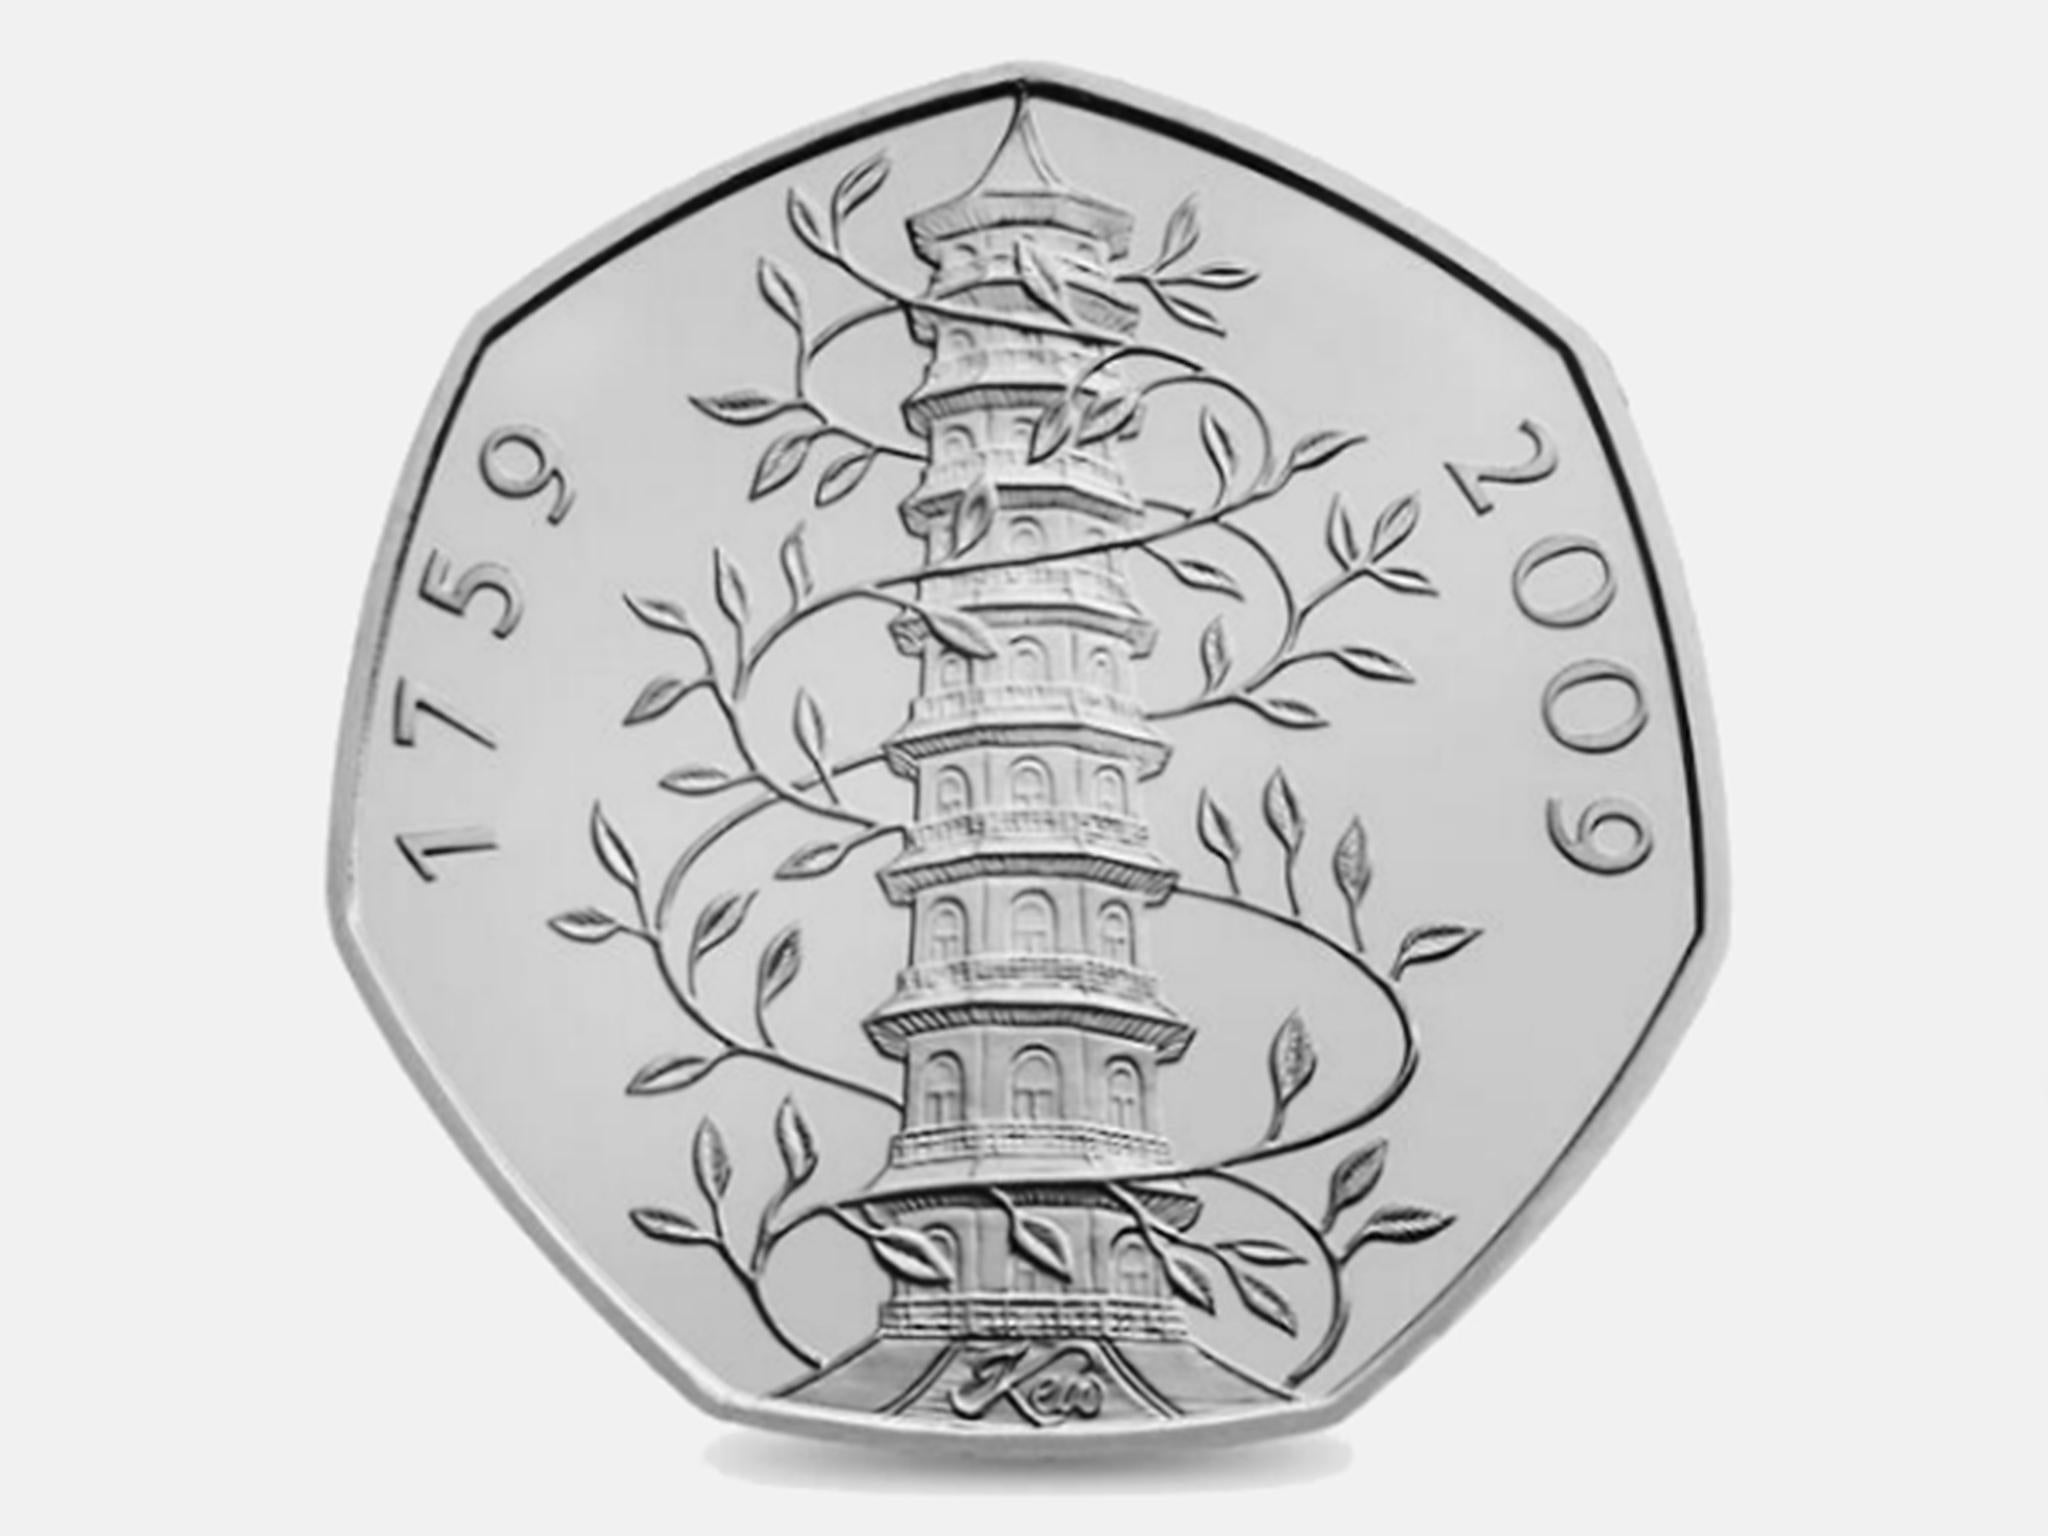 The Kew Garden 50p coin was released to celebrate the 250th anniversary of the foundation of Kew Gardens